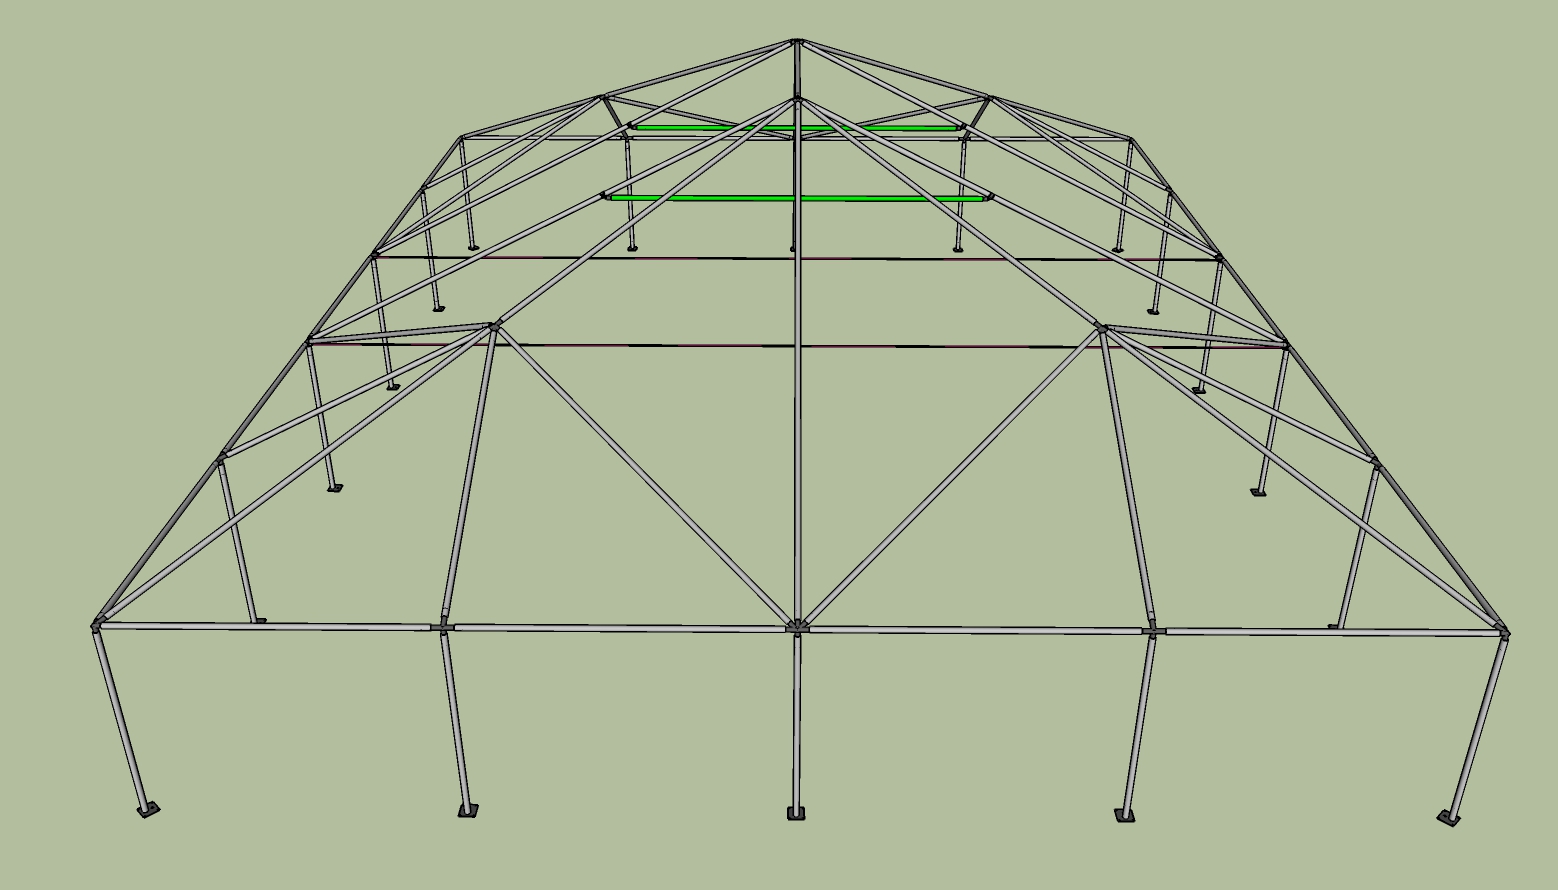 40x50 frame tent side view